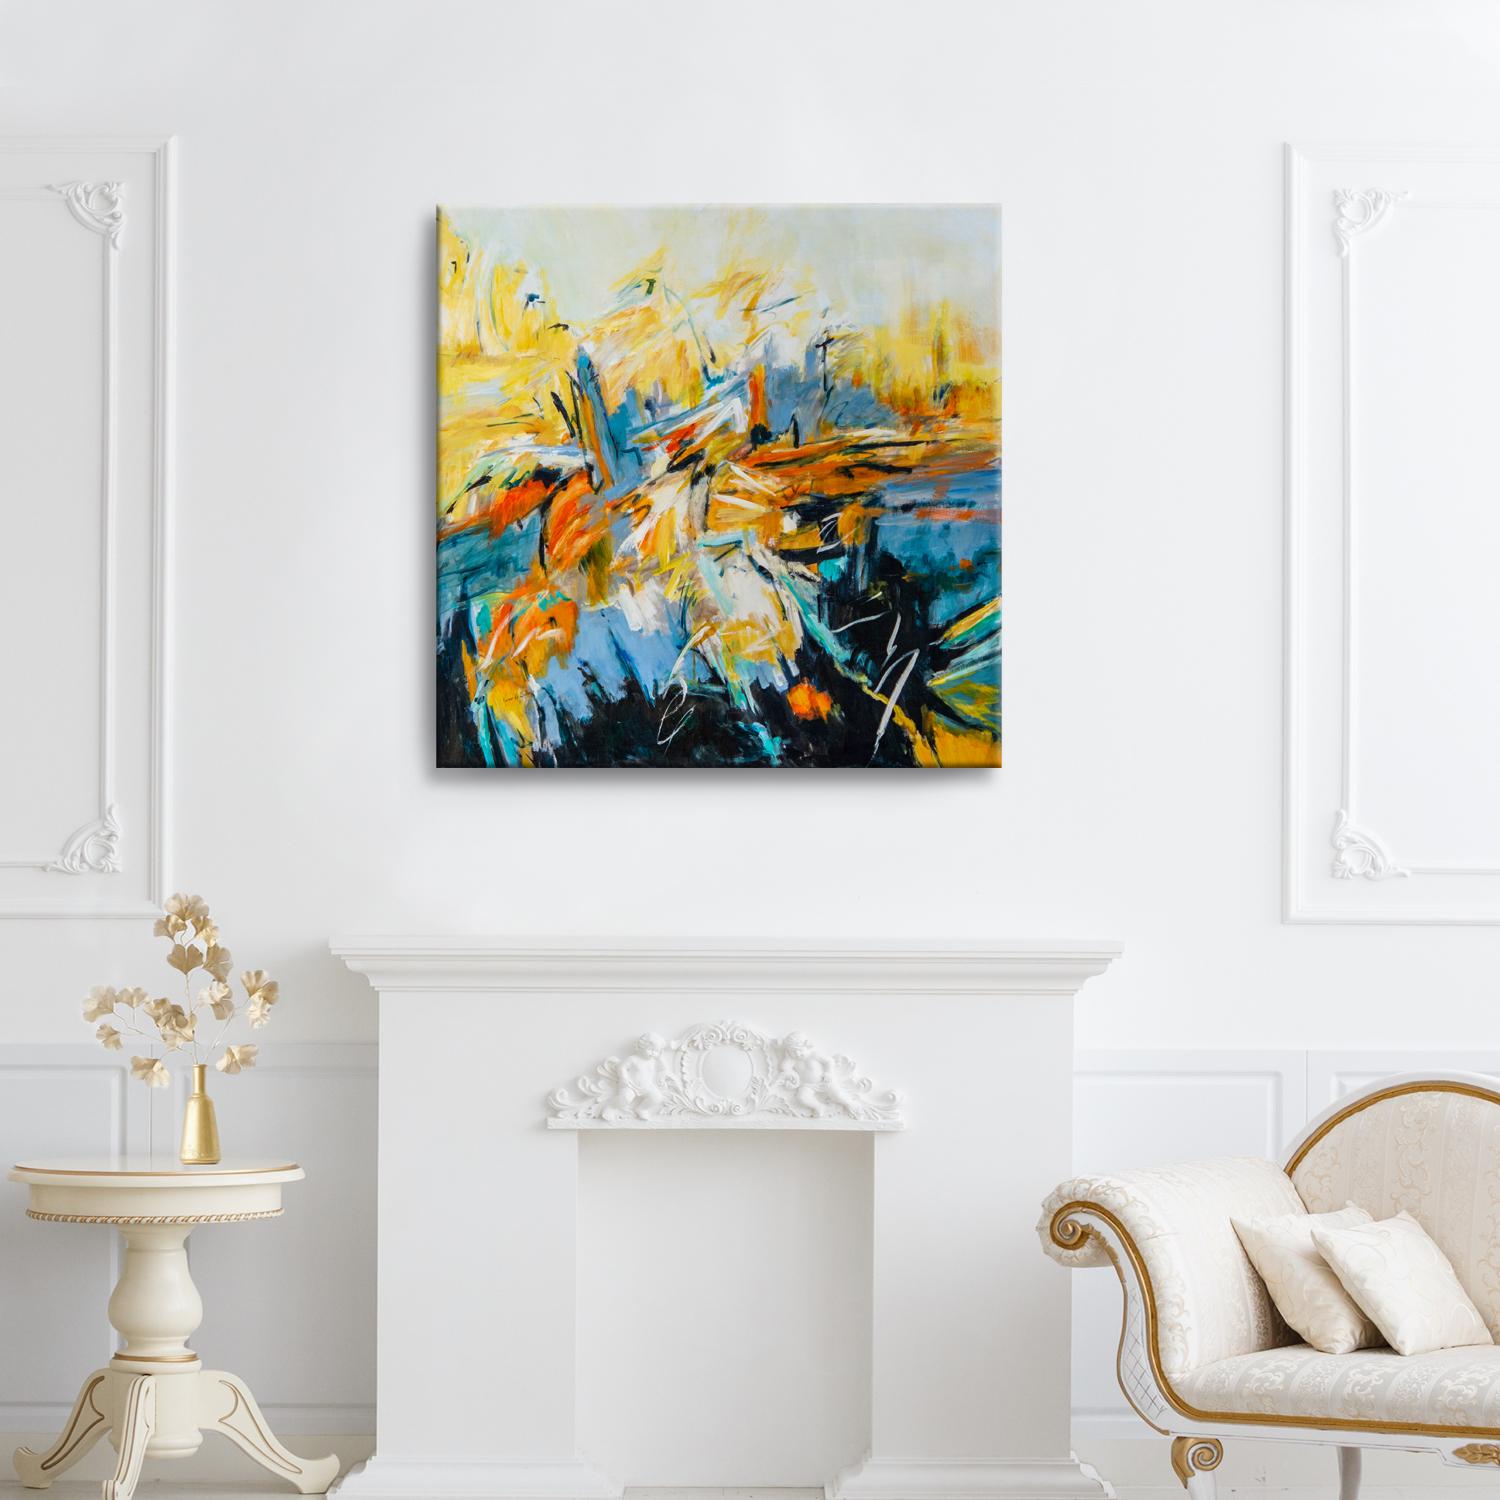 ‘Autumn Blaze' Wrapped Canvas Original Painting features an energetic abstract aesthetic in vibrant tones of yellow, blue, black, red, and orange. Modern divinity expressed on canvas, Karen H. Salup’s work exhibits a multitude of textures enveloped